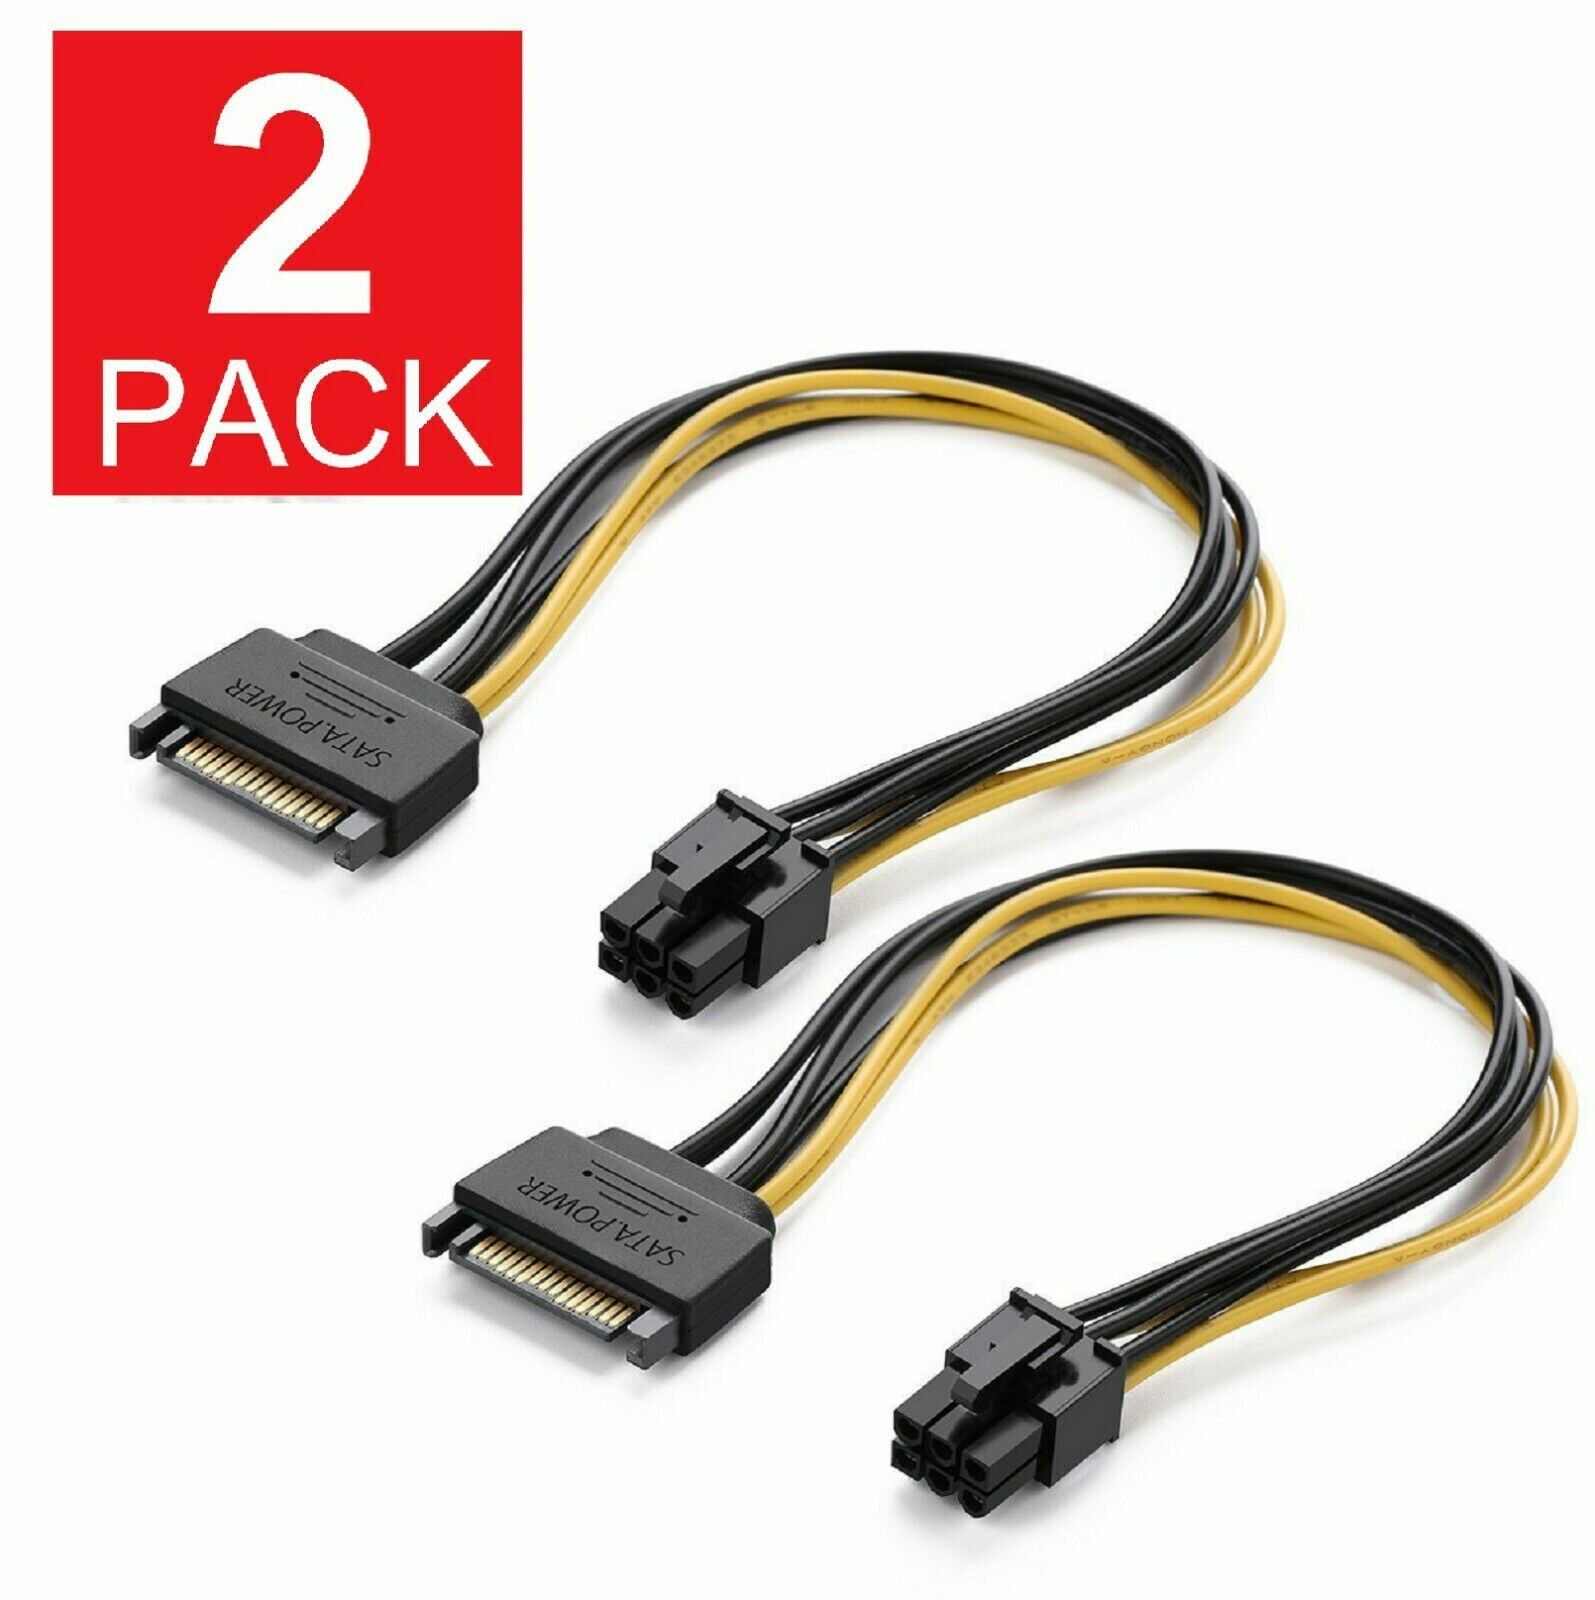 15pin SATA Power to 6pin PCIe PCI-e PCI Express Adapter Cable for Video Card